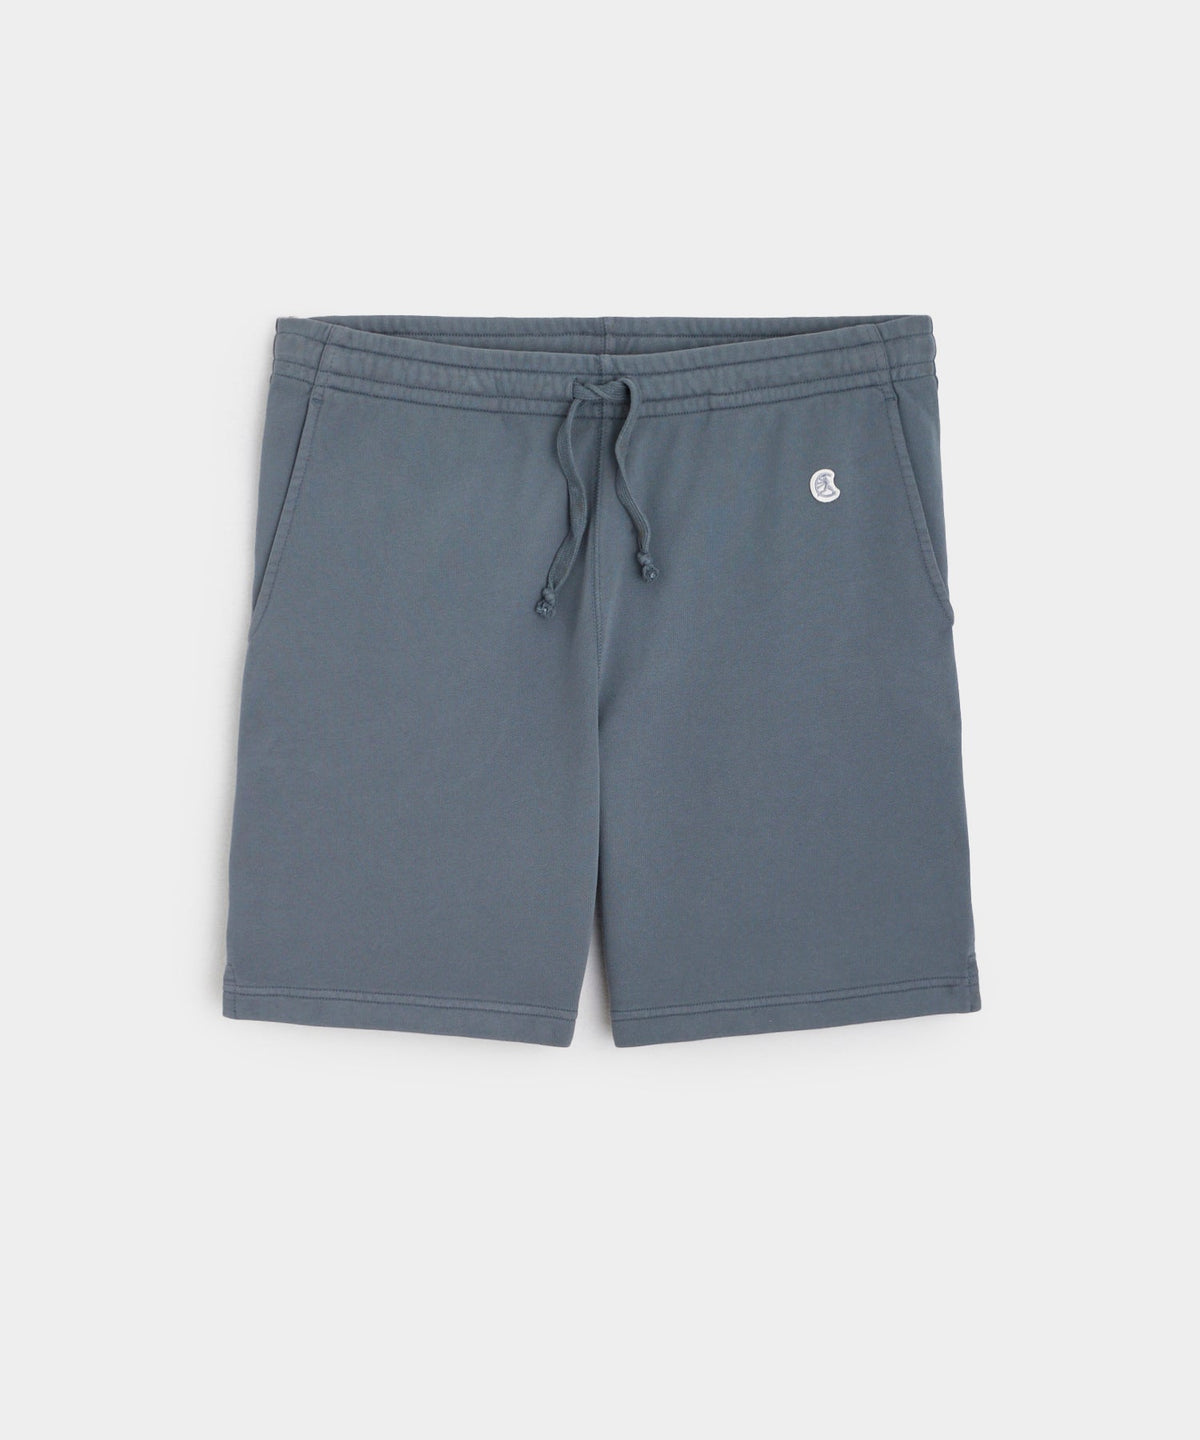 7" Midweight Warm Up Short in Blue Metal